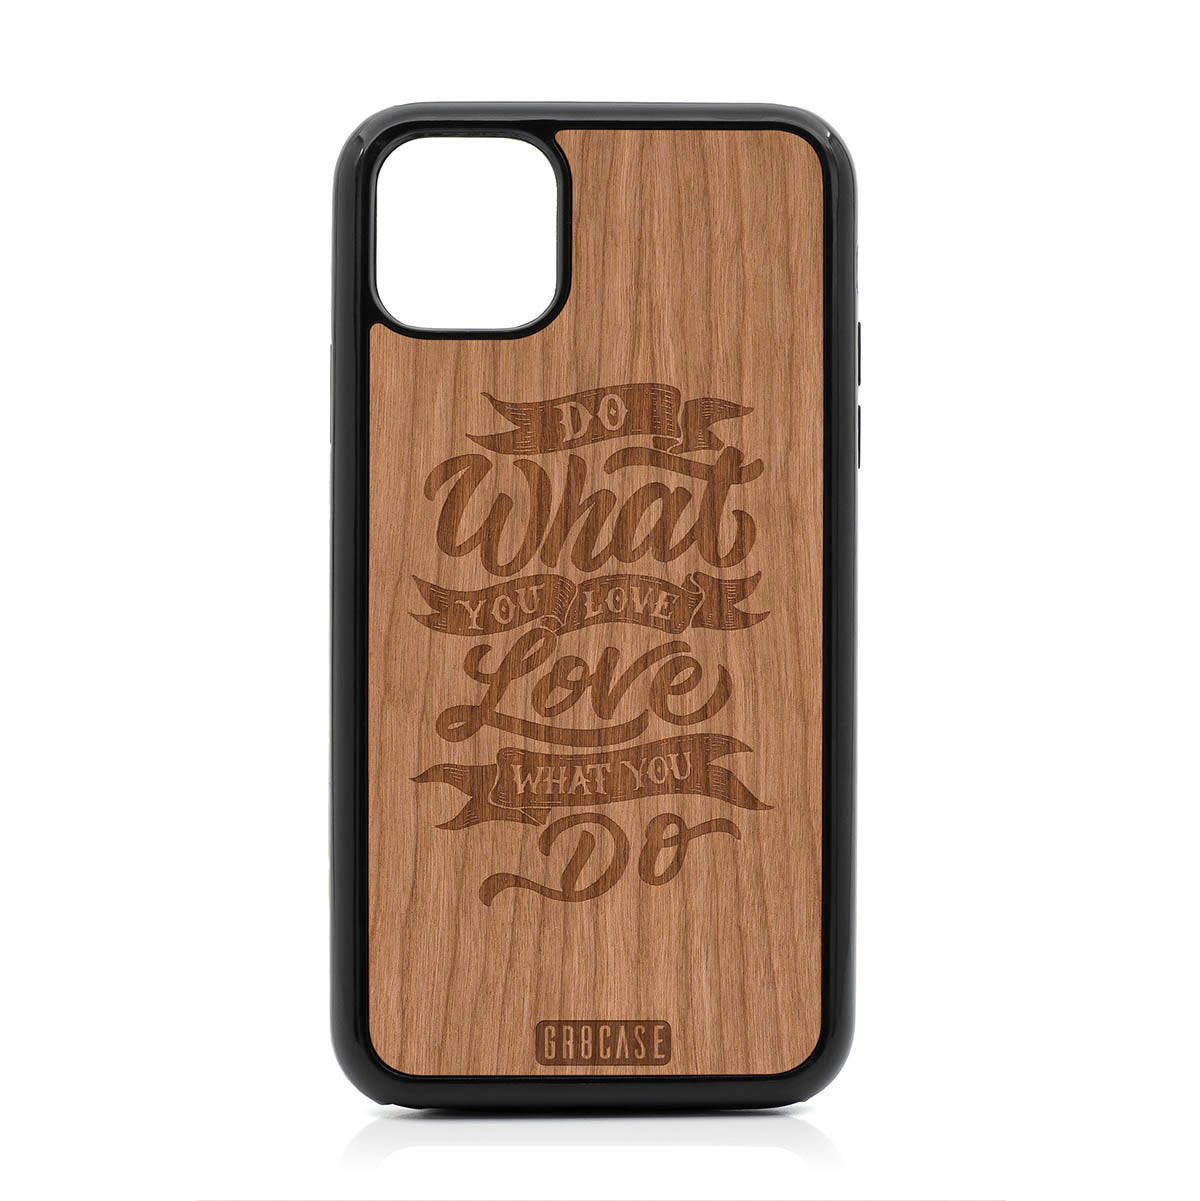 Do What You Love Love What You Do Design Wood Case For iPhone 11 Pro Max by GR8CASE